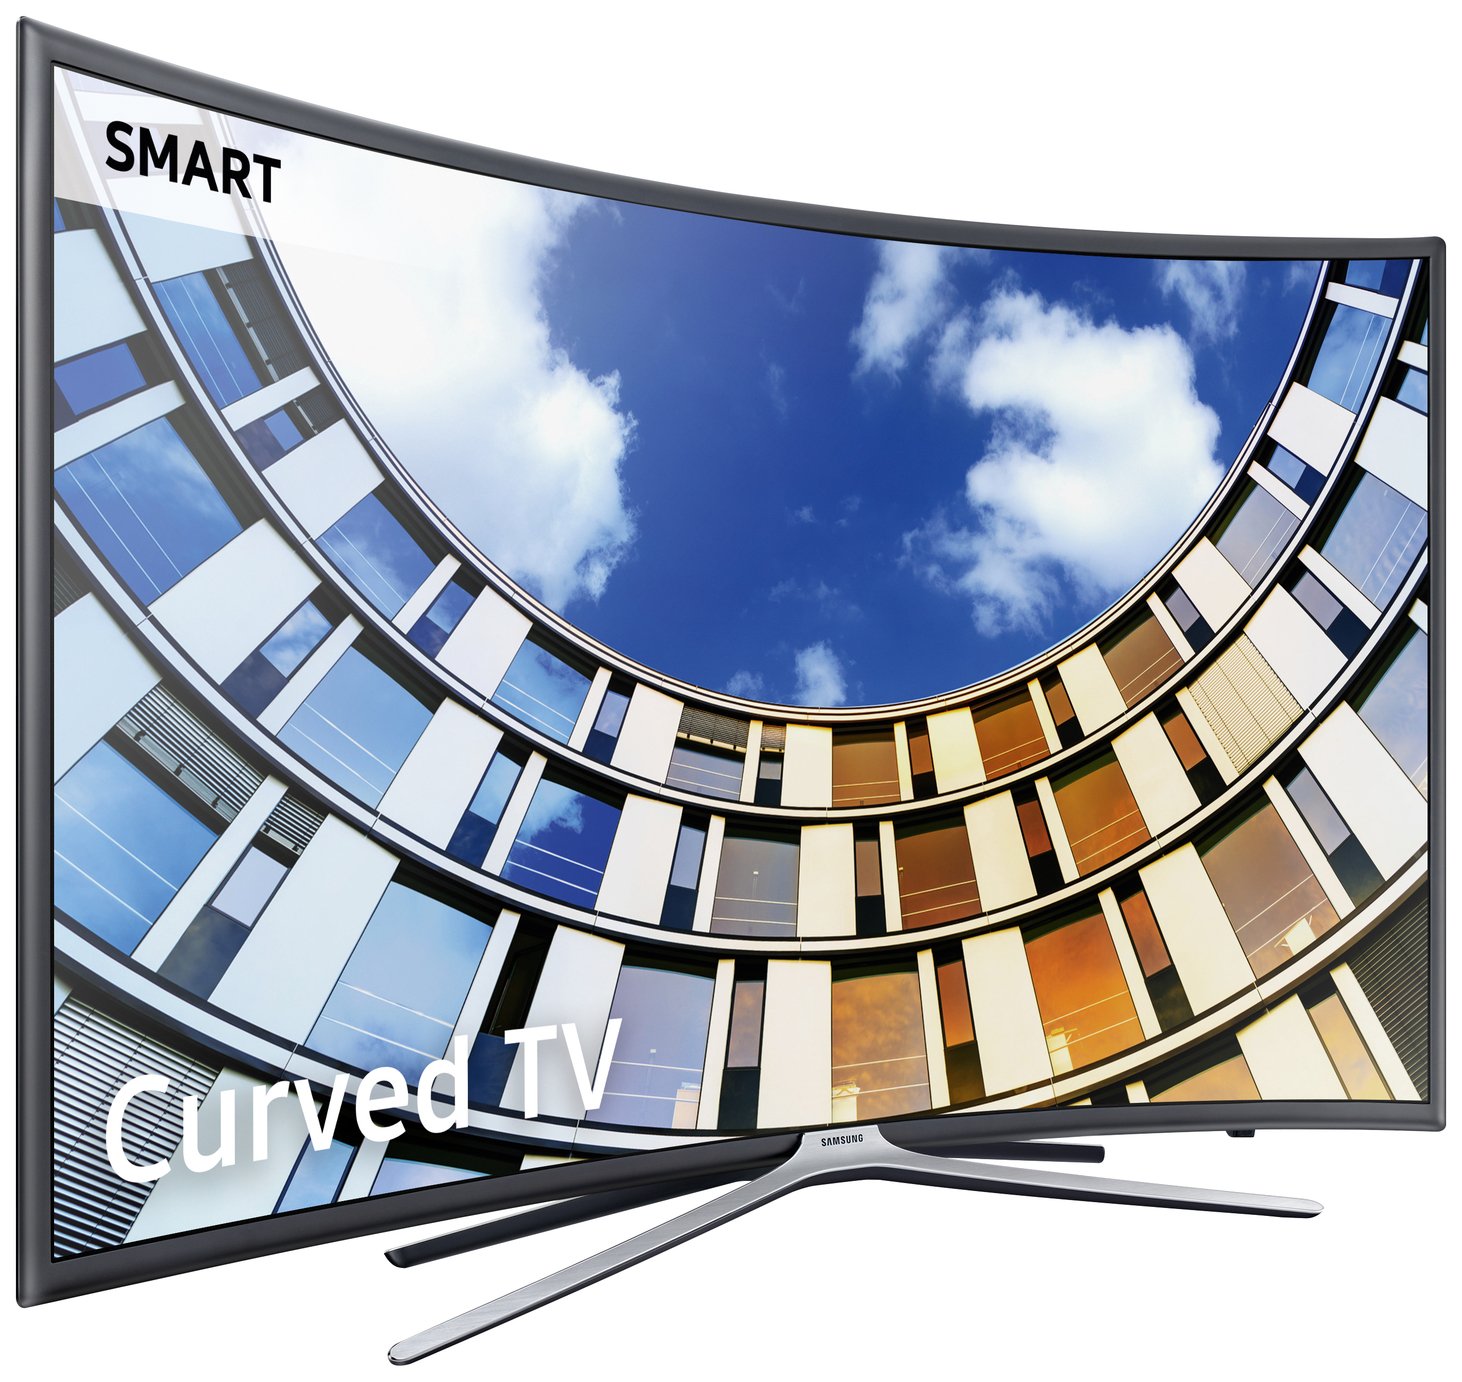 Samsung 49M6320 49 Inch Curved Full HD Smart TV Review